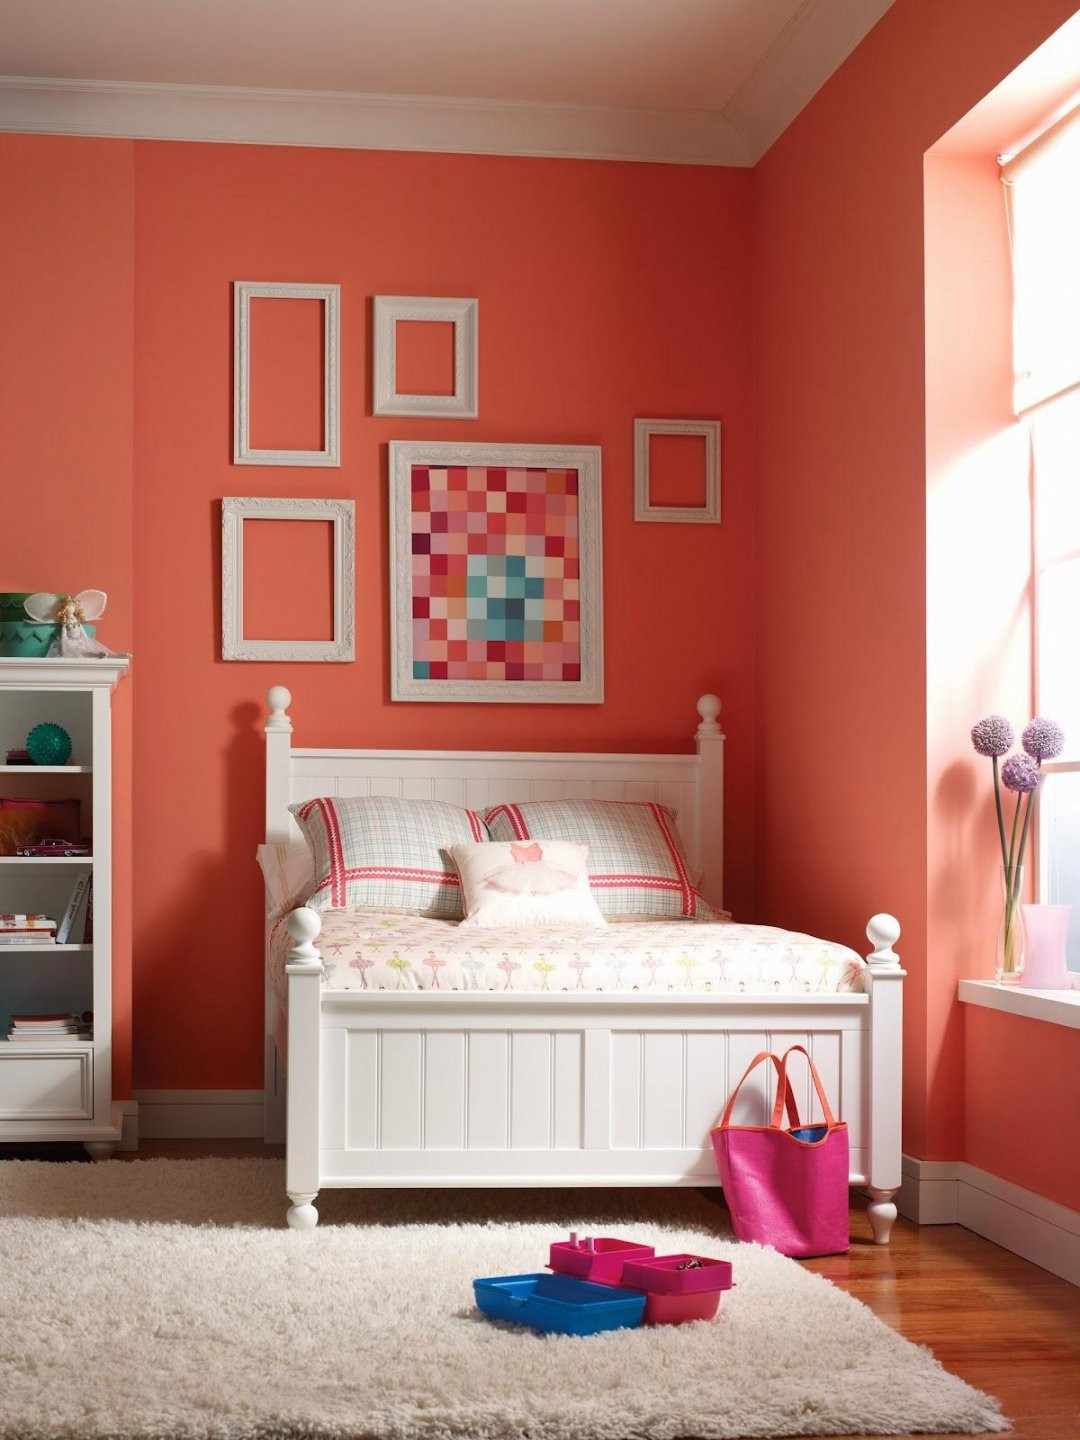 Bedroom Paint Color
 50 Perfect Bedroom Paint Color Ideas for Your Next Project